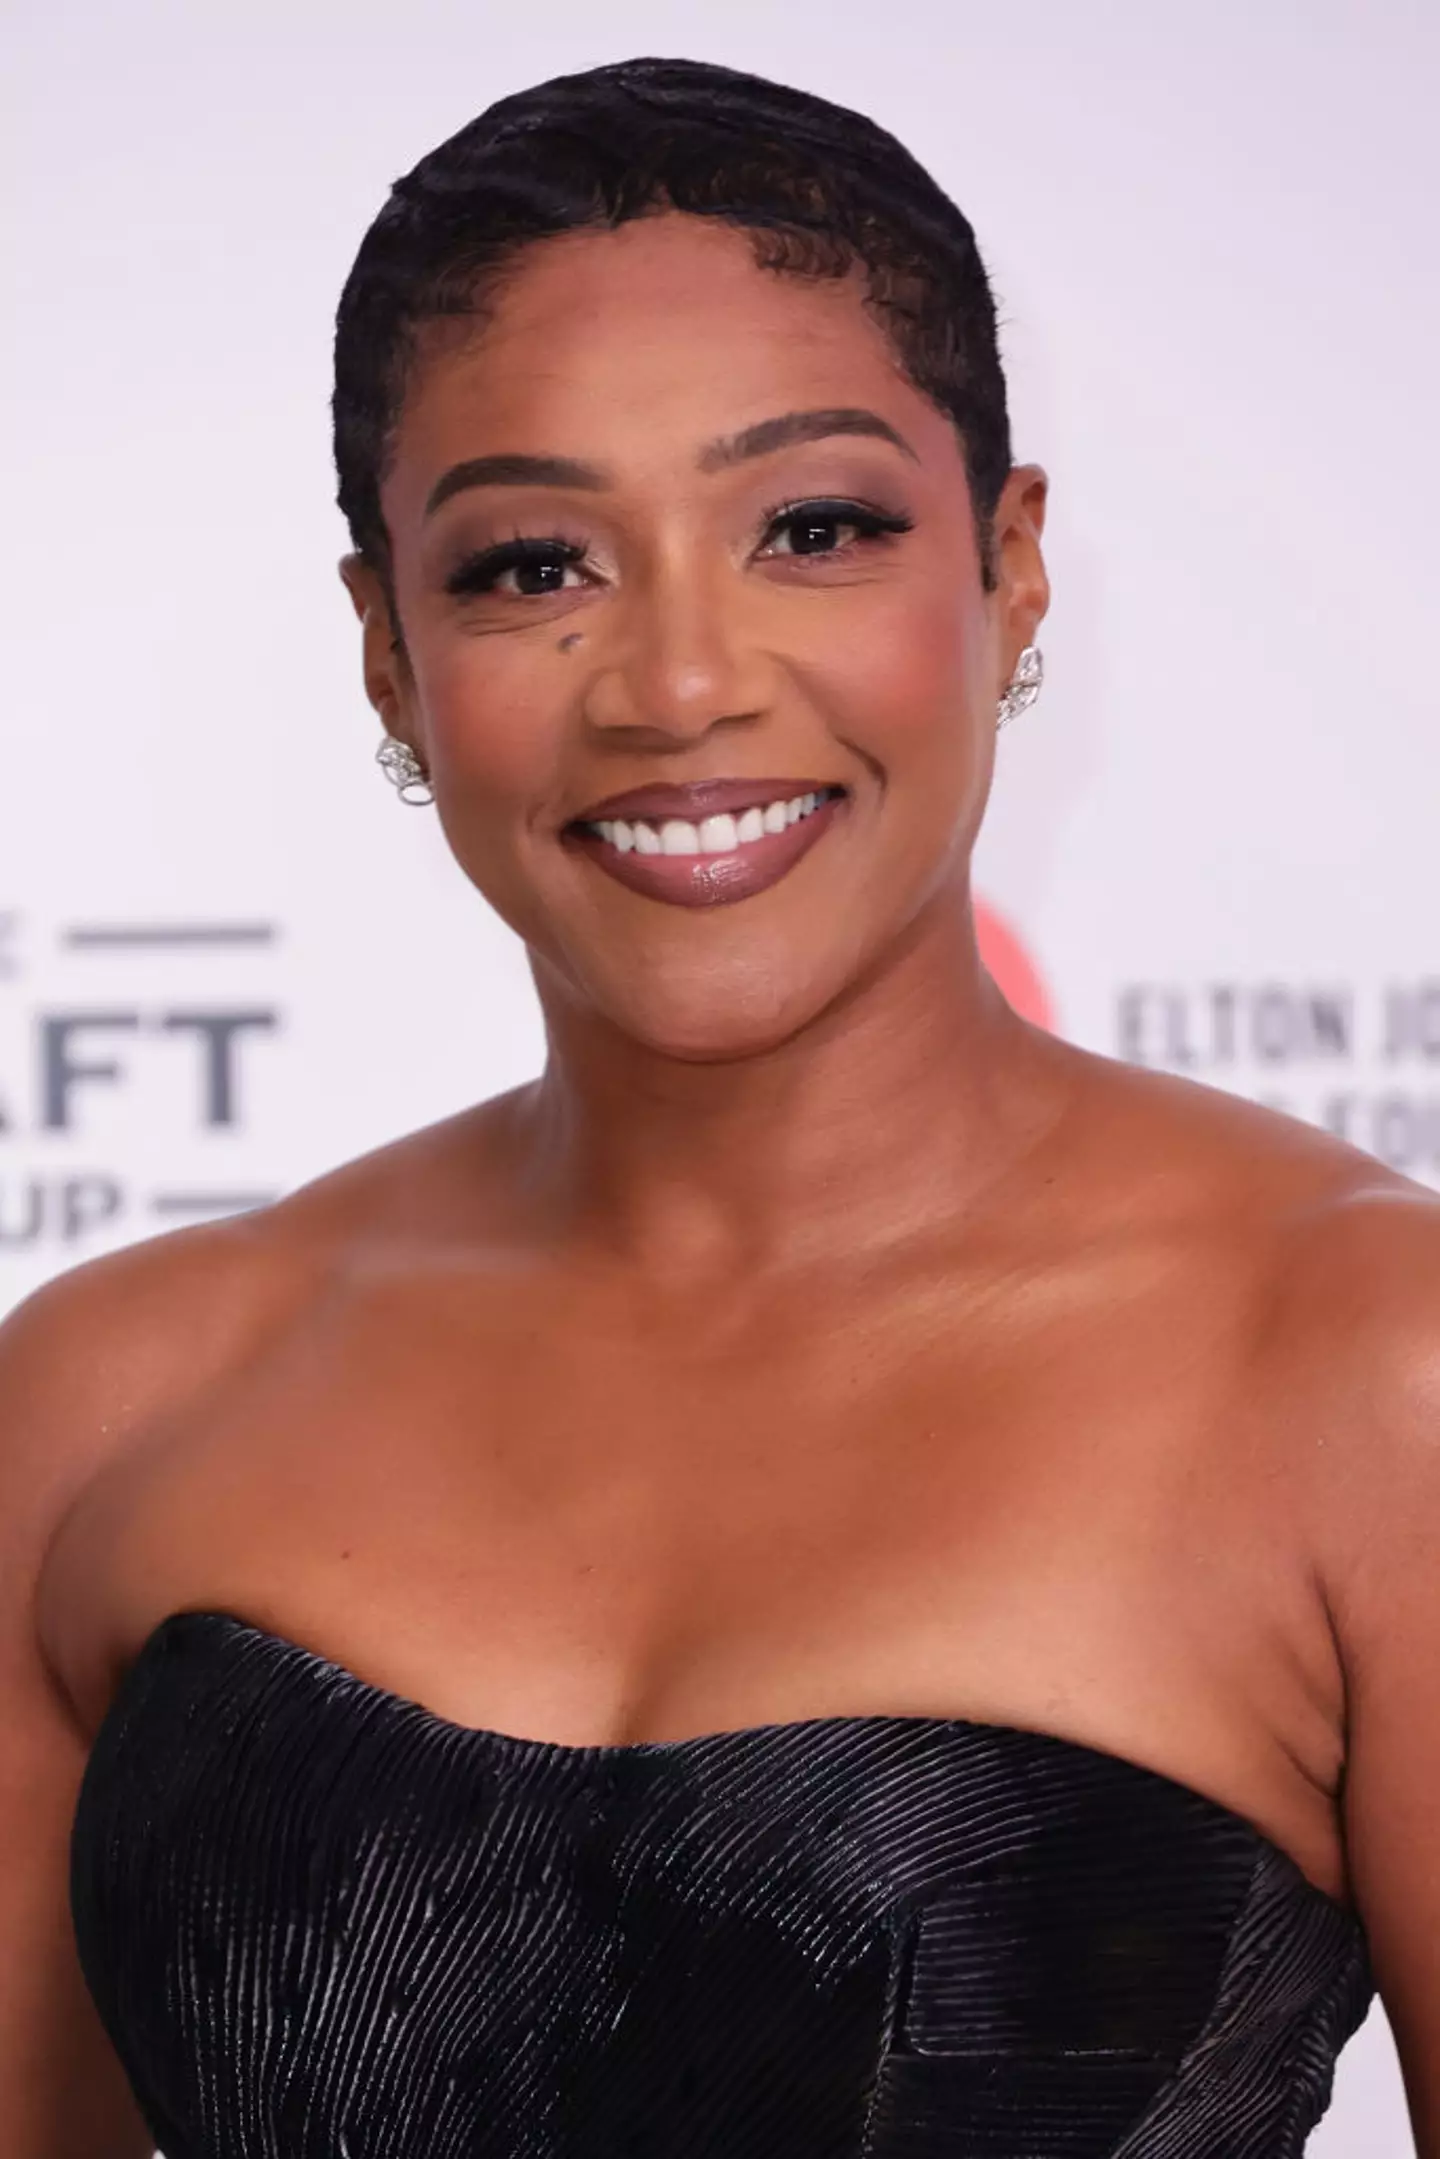 Tiffany Haddish has opened up about her reproductive health battles through the years. (Momodu Mansaray / Stringer / Getty Images)